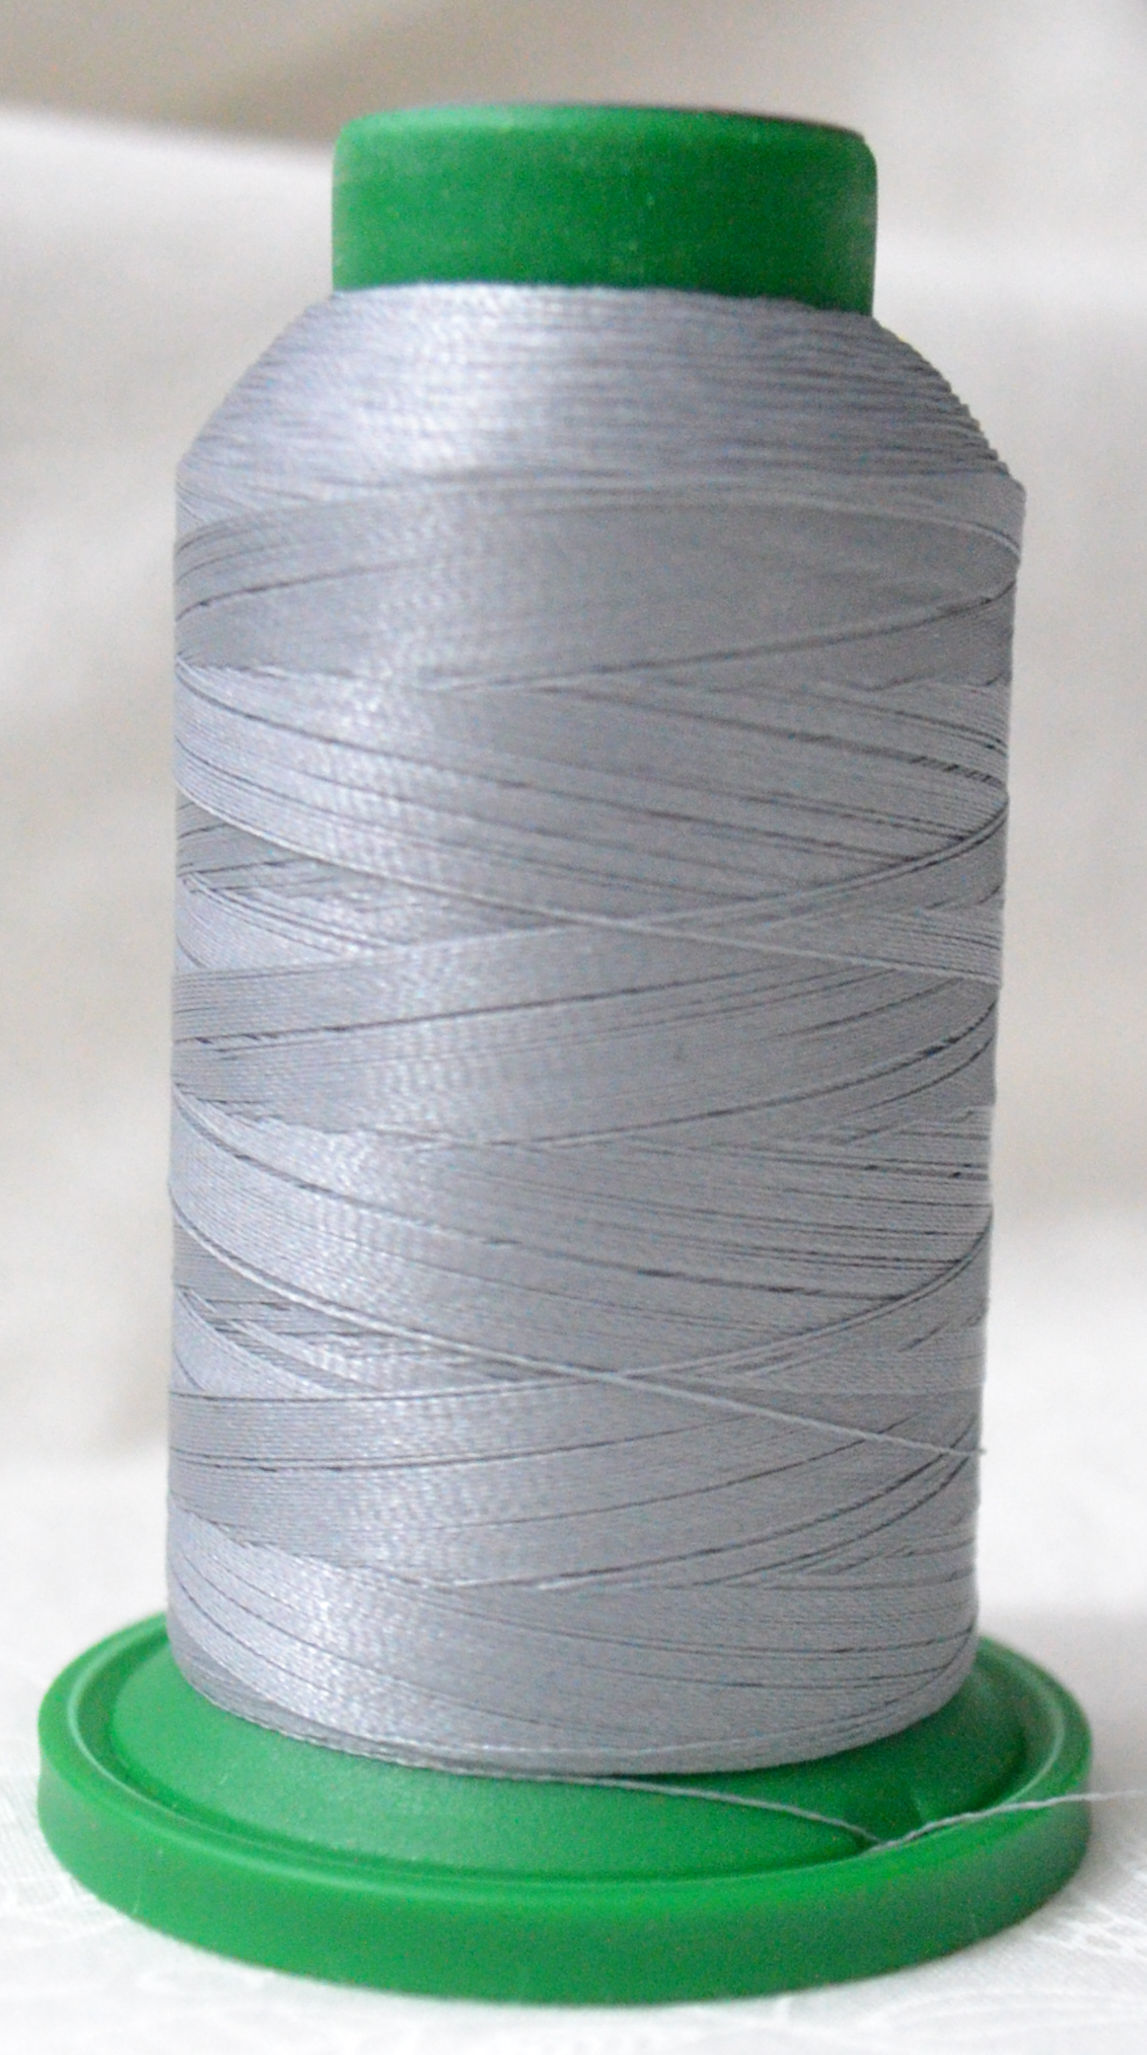 ISACORD 40 Trilobal Polyester Embroidery Thread 40 wt 1000M Gray and Black Colors